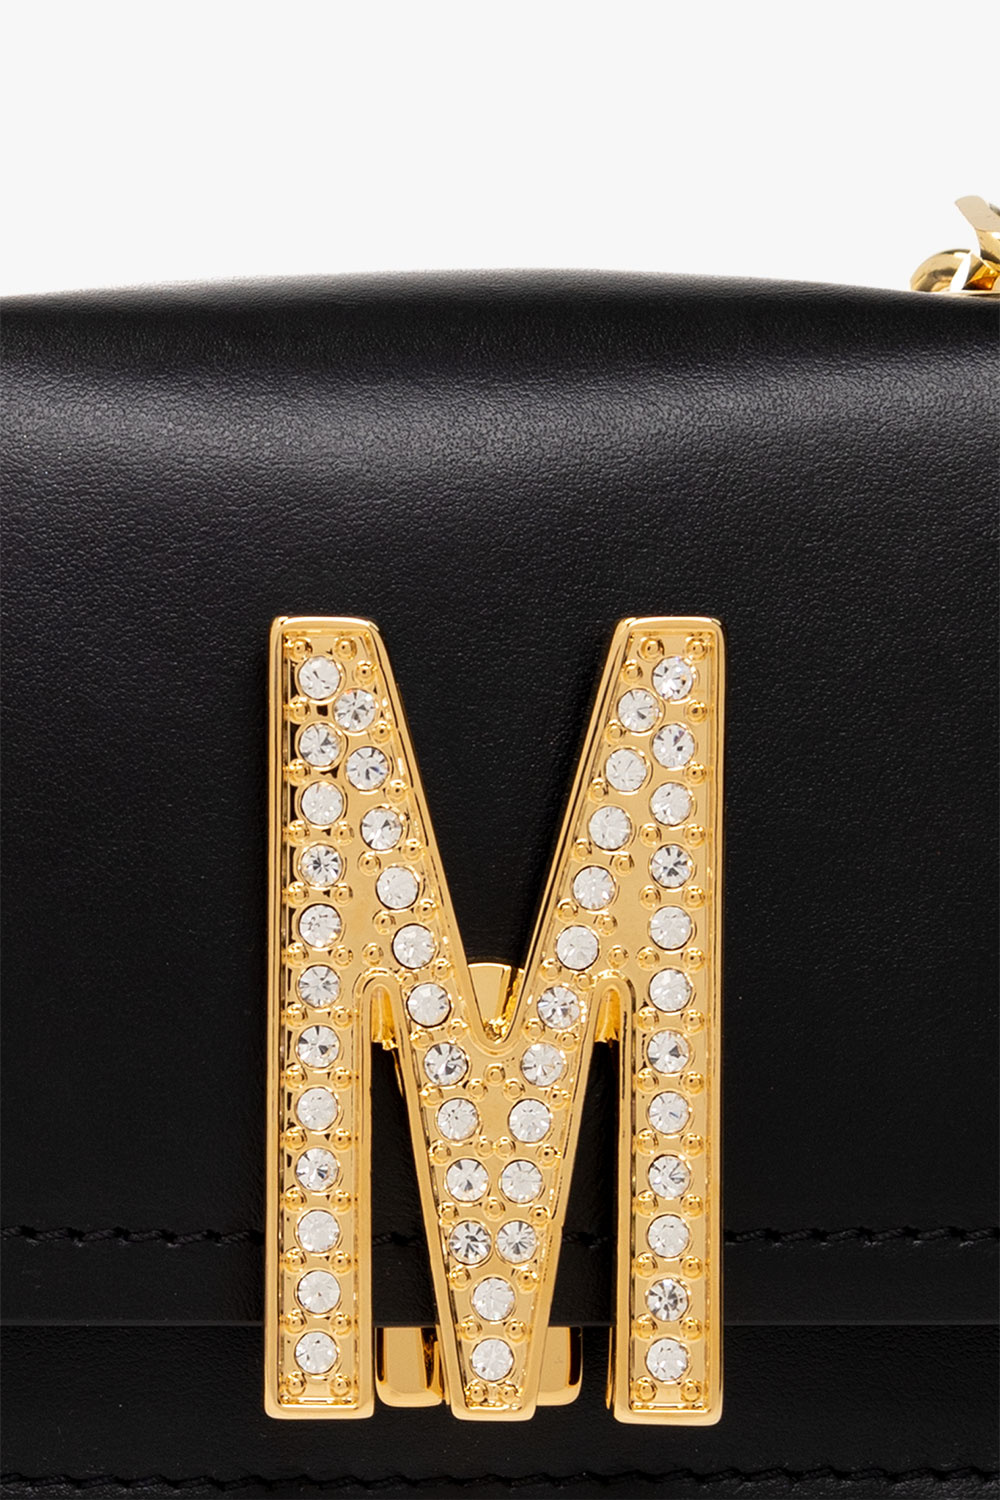 Moschino Quotations from second hand bags Burberry Dryden